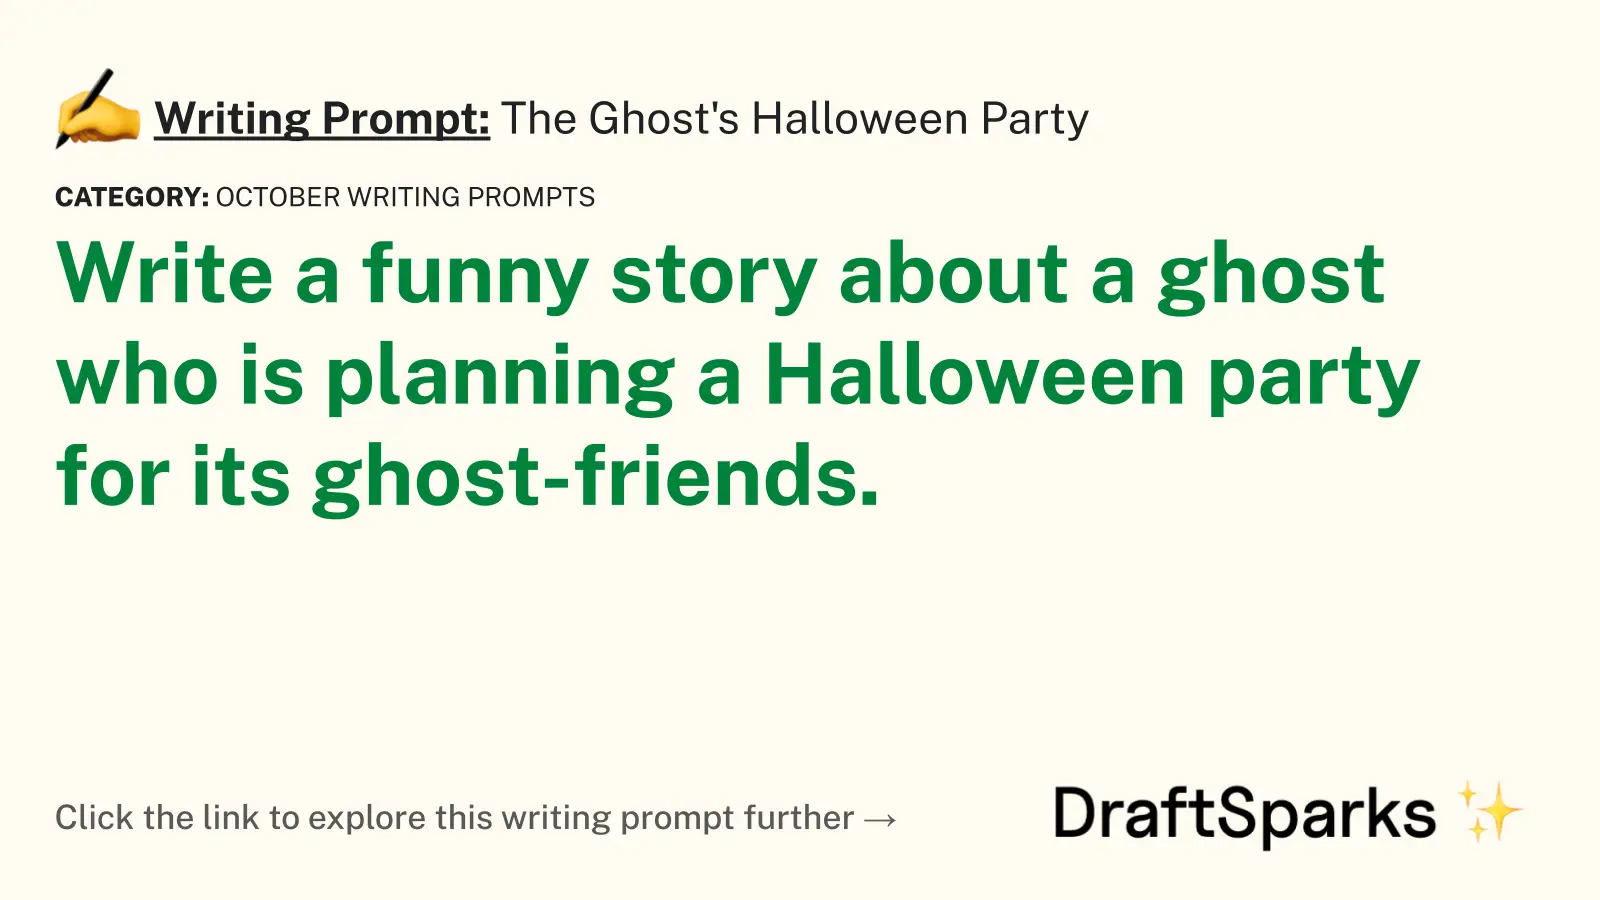 The Ghost’s Halloween Party